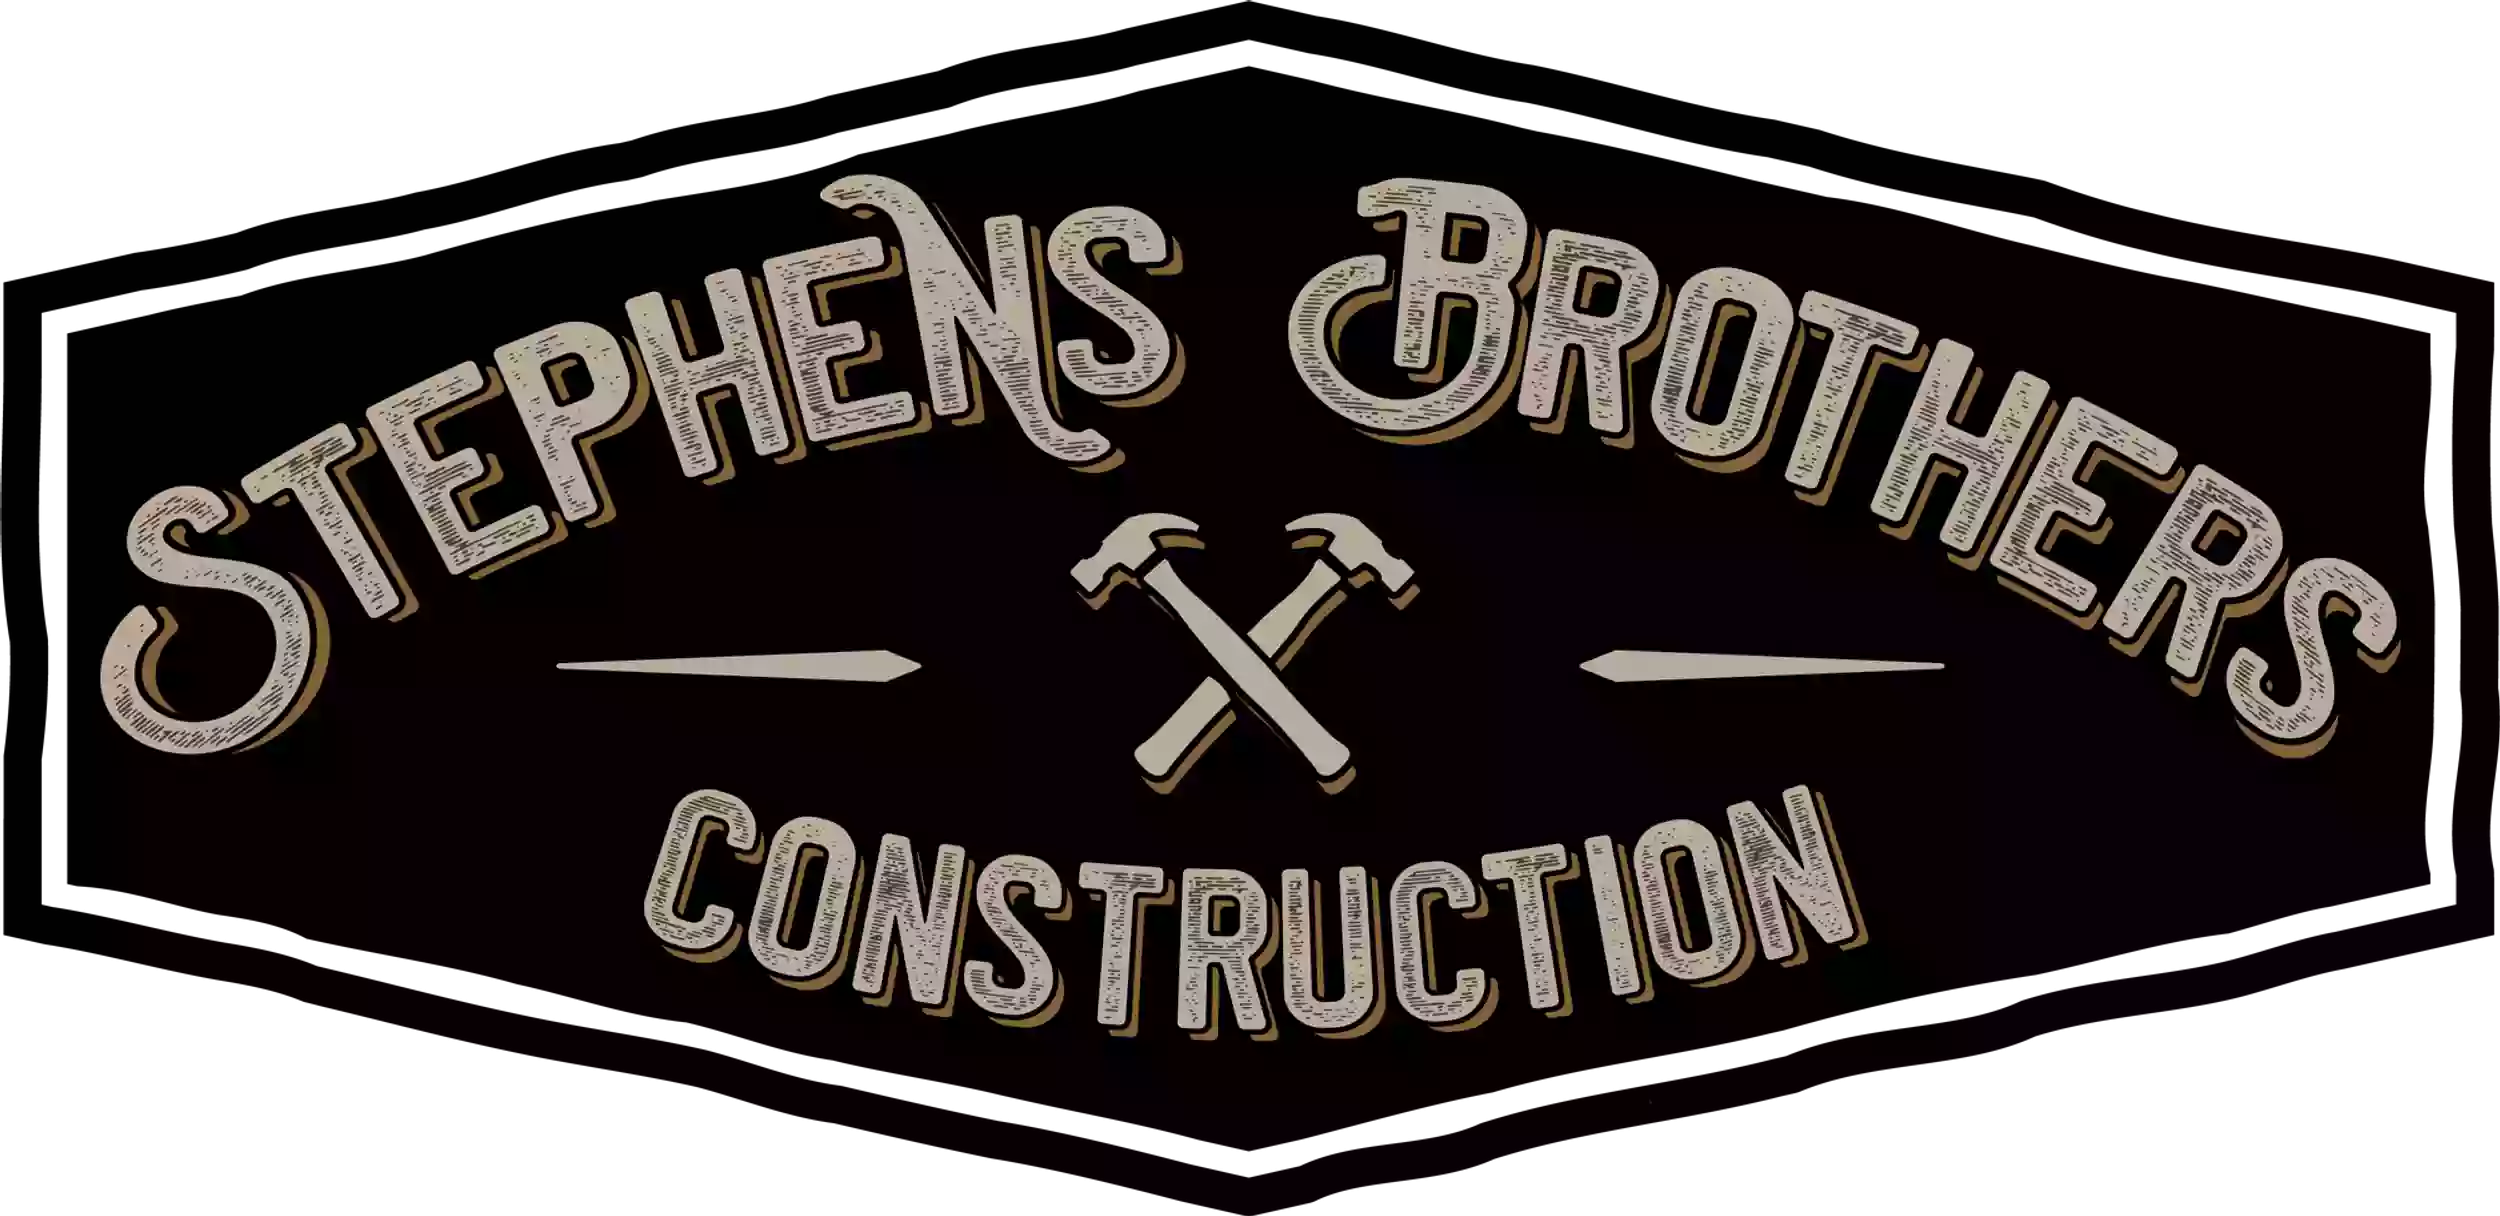 Stephens Brothers Construction Inc.